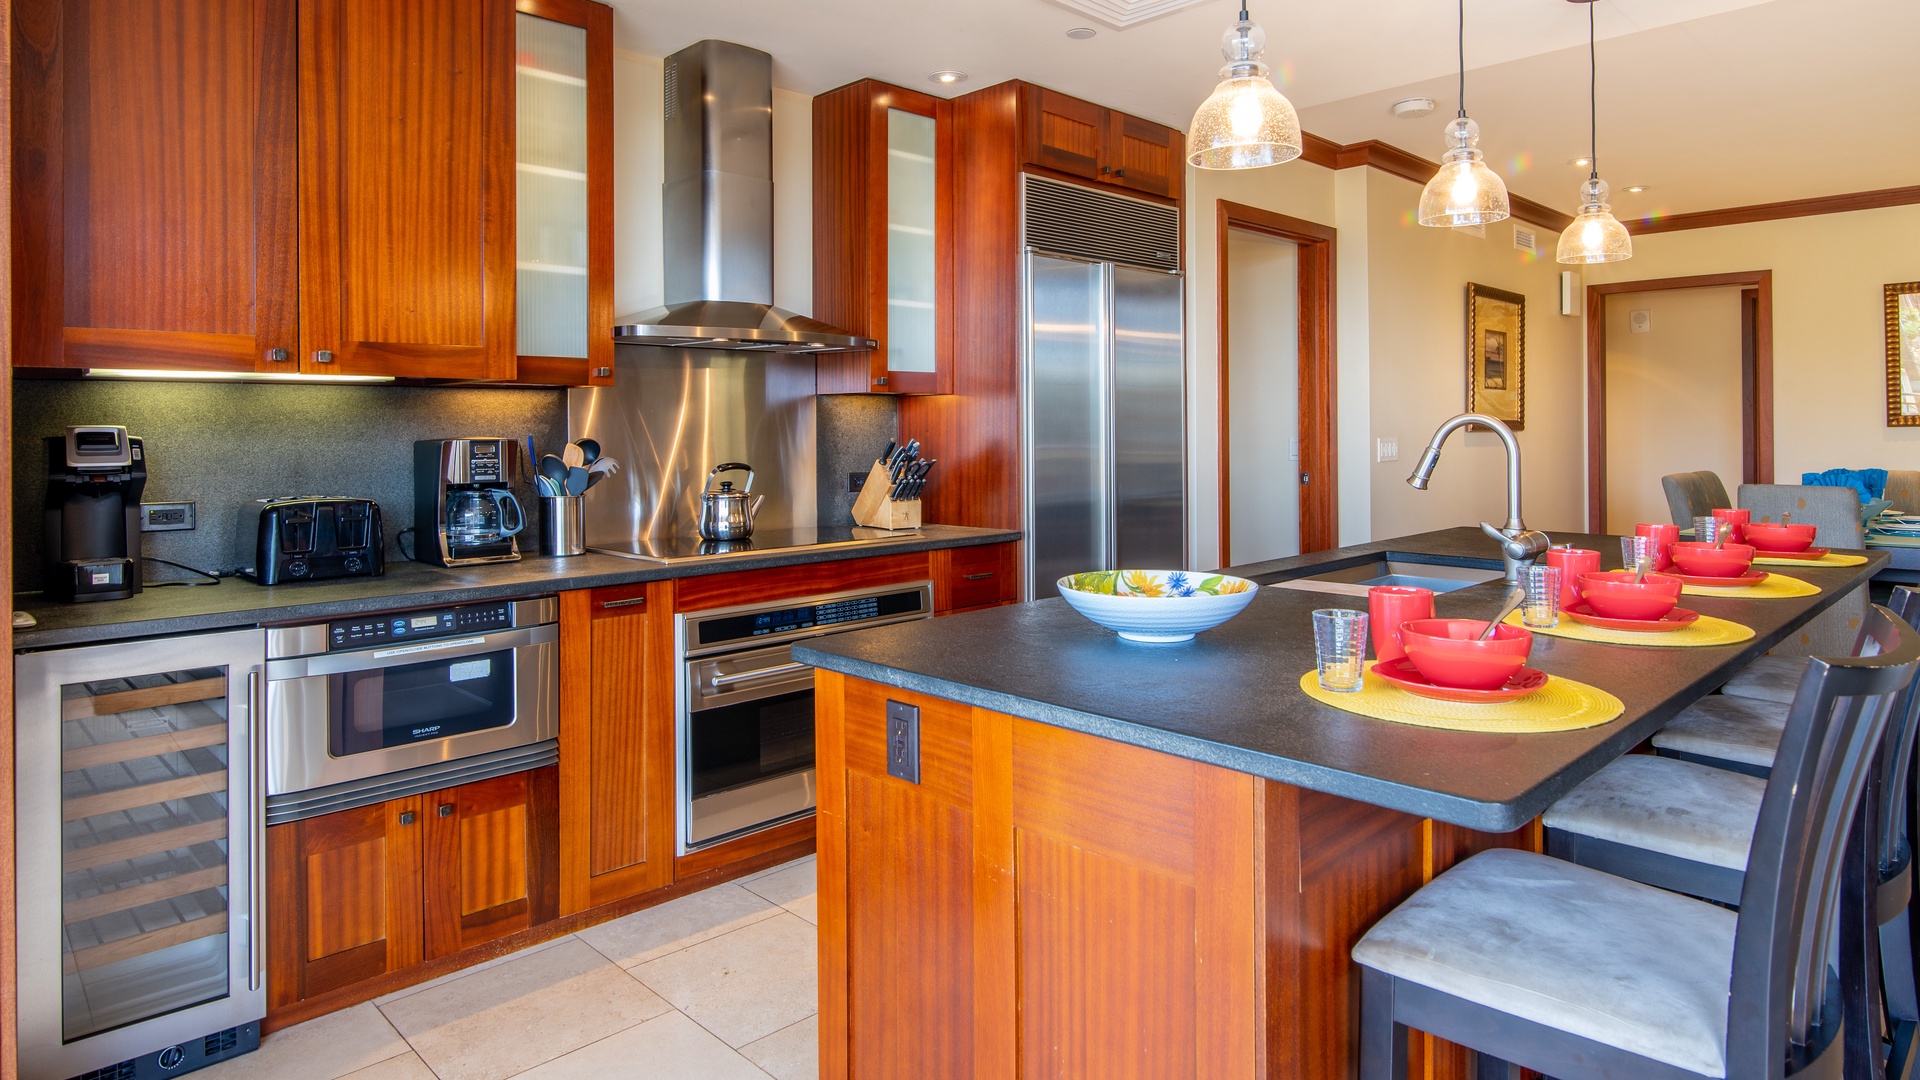 Kapolei Vacation Rentals, Ko Olina Beach Villas O210 - The kitchen is a dream with stainless steel appliances.